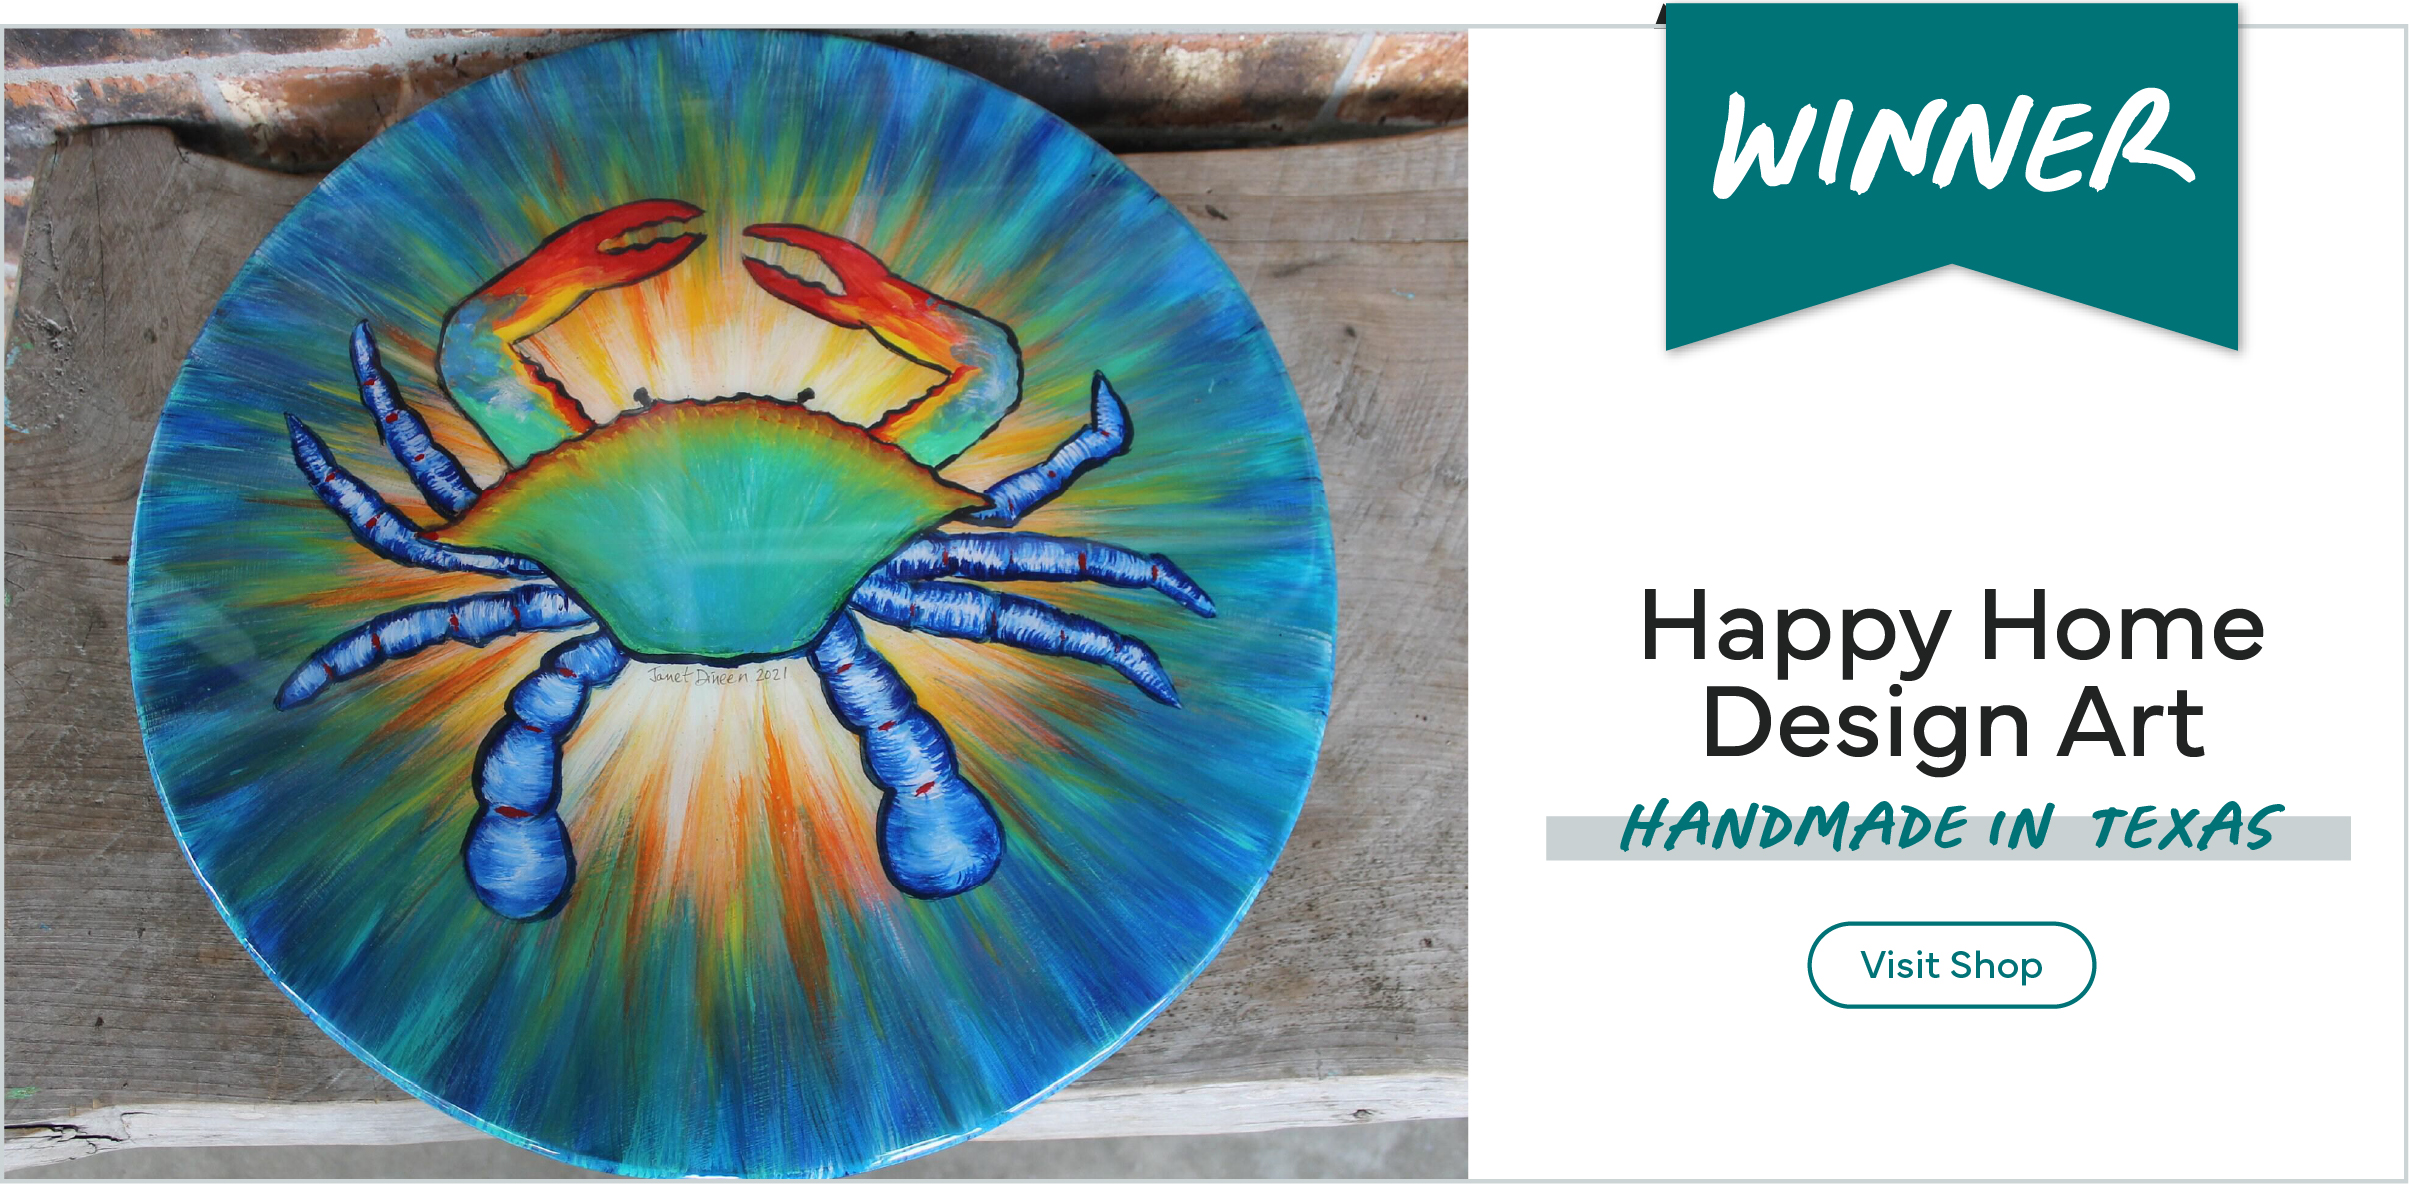 Handmade in Texas - Blue Crab Hand Painted Lazy Susan